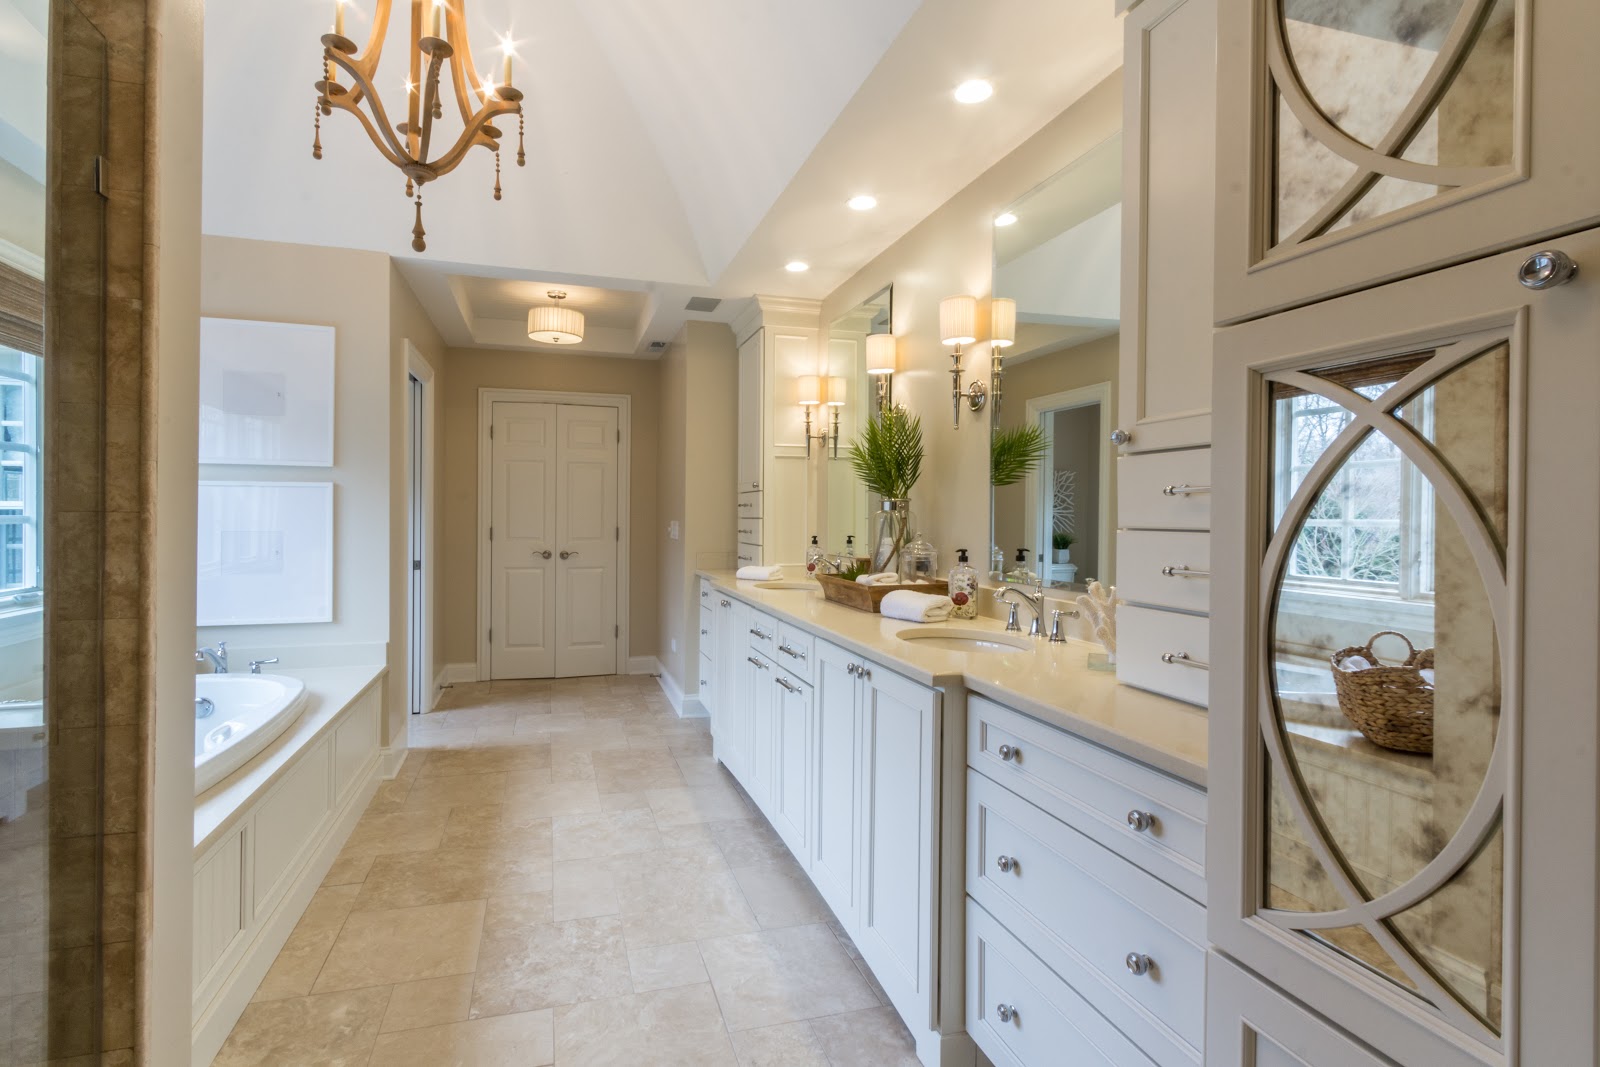 Elegant white transitional bathroom with mirrored cabinetry, dual sinks, a vaulted ceiling and chandelier.